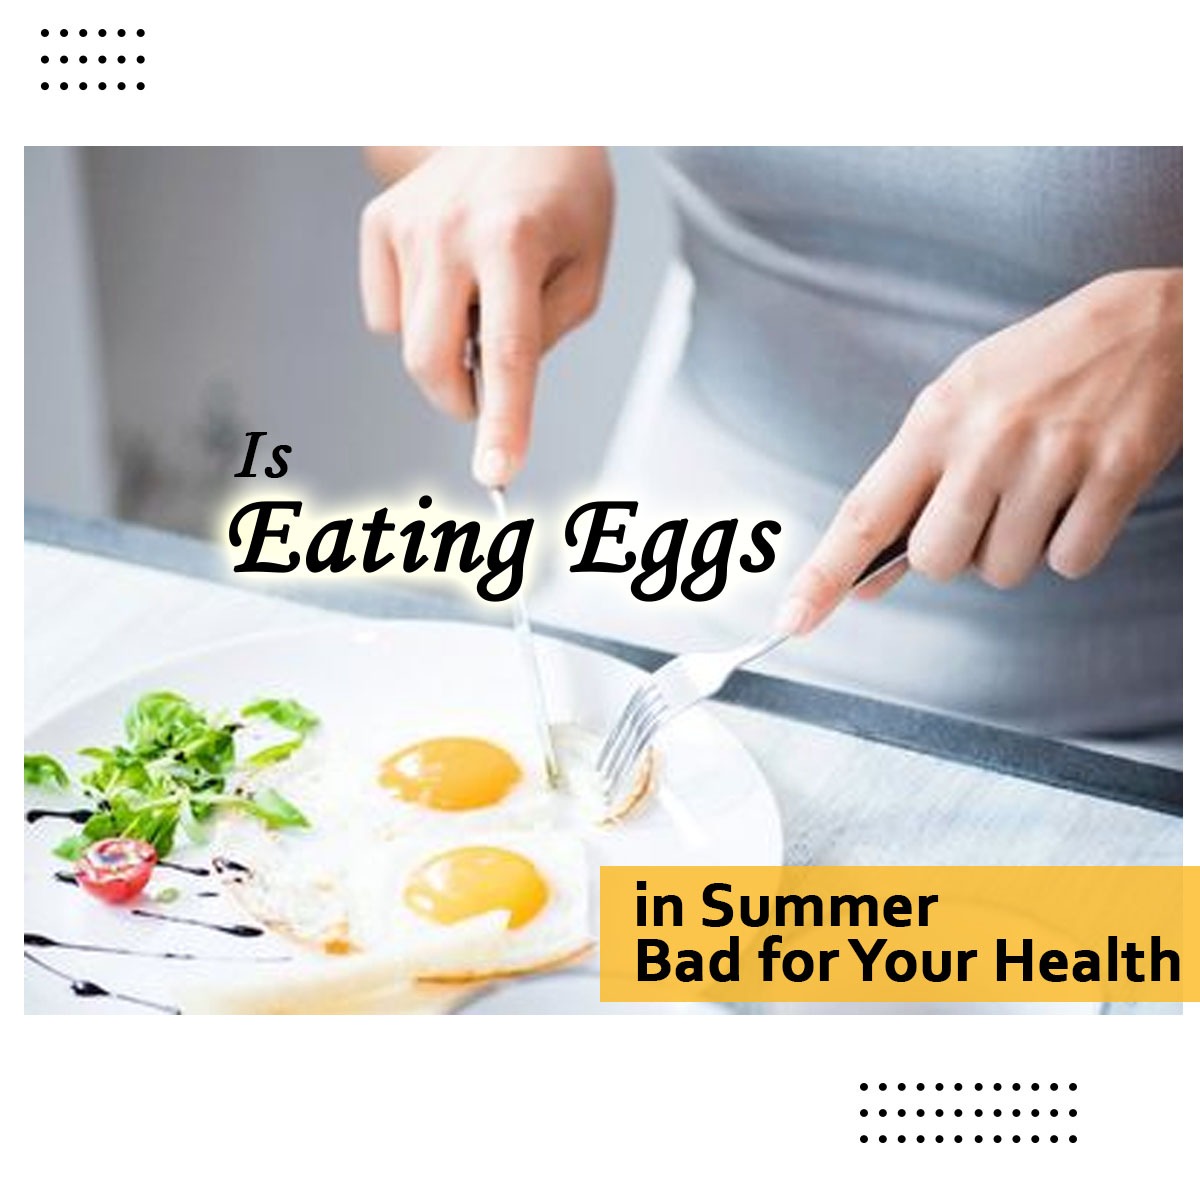 Is Eating Eggs in Summer Bad for Your Health